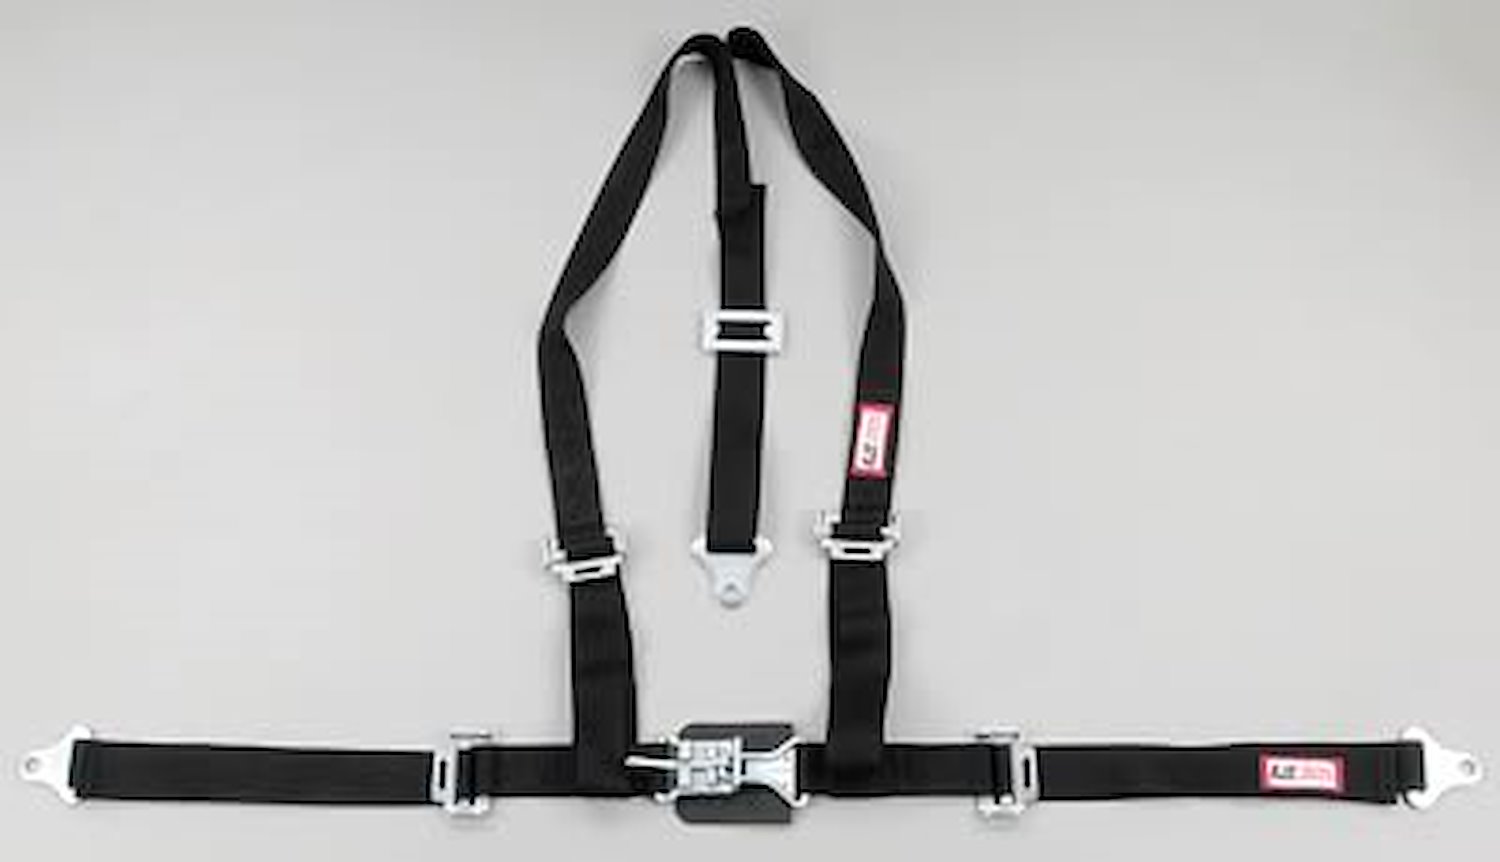 NON-SFI L&L HARNESS 2 PULL UP Lap Belt SNAP SEWN IN 2 S.H. INDIVIDUAL FLOOR Mount WRAP/SNAP HOT PINK